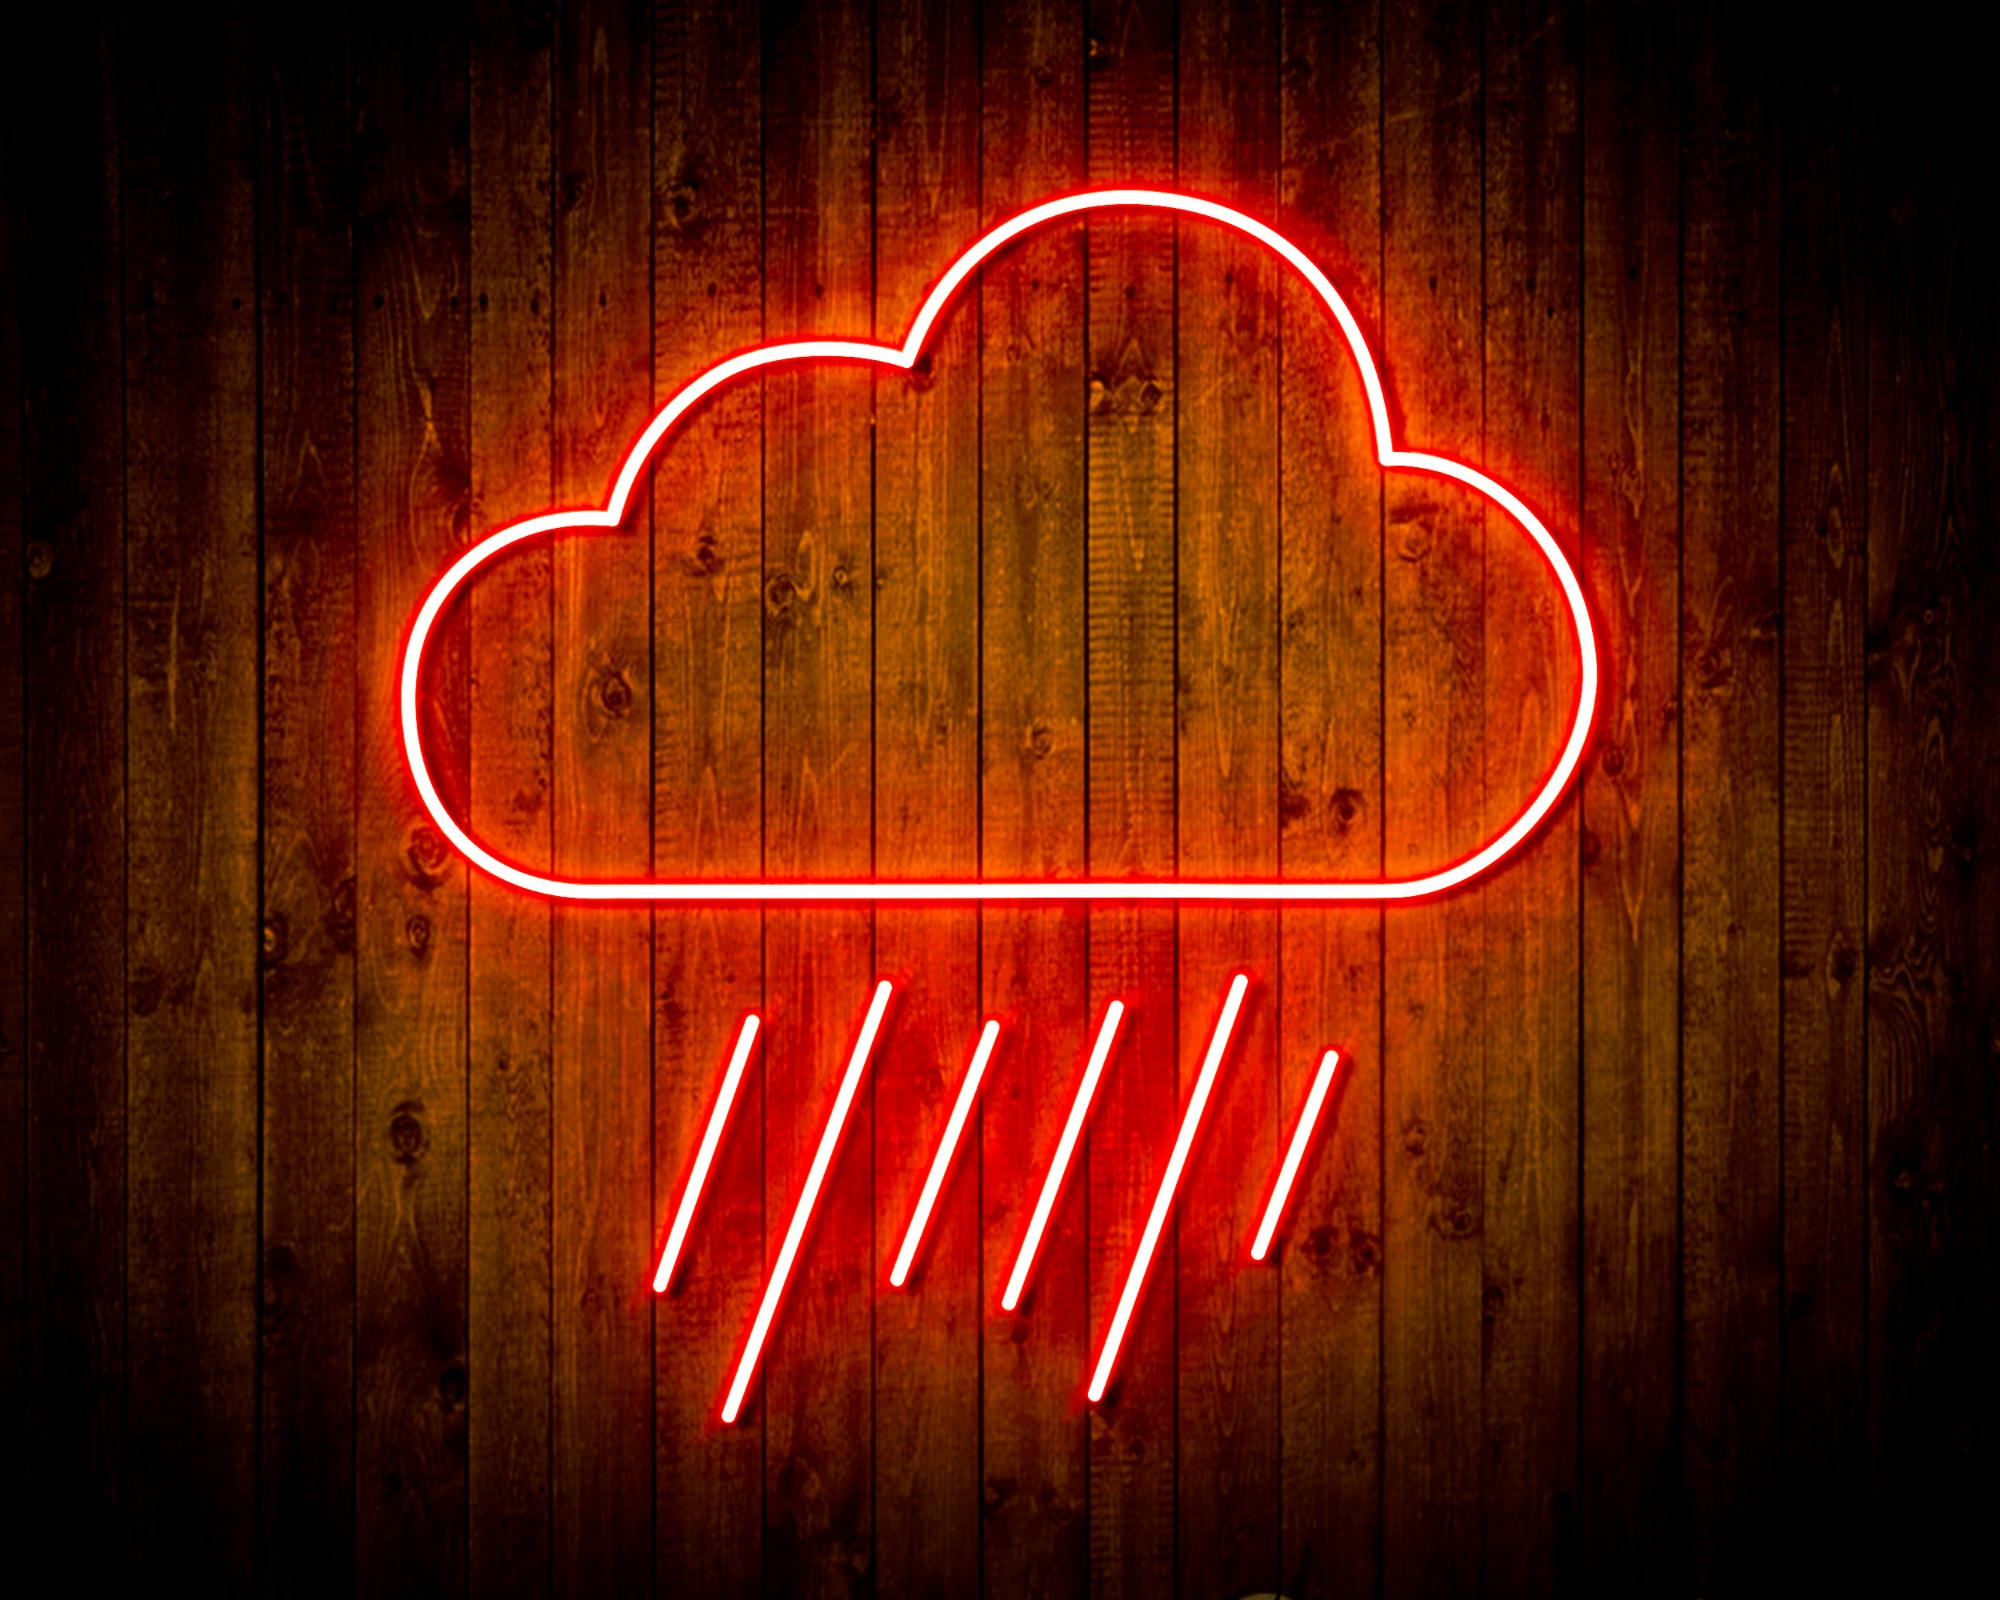 Cloud and Raining LED Neon Sign Wall Light